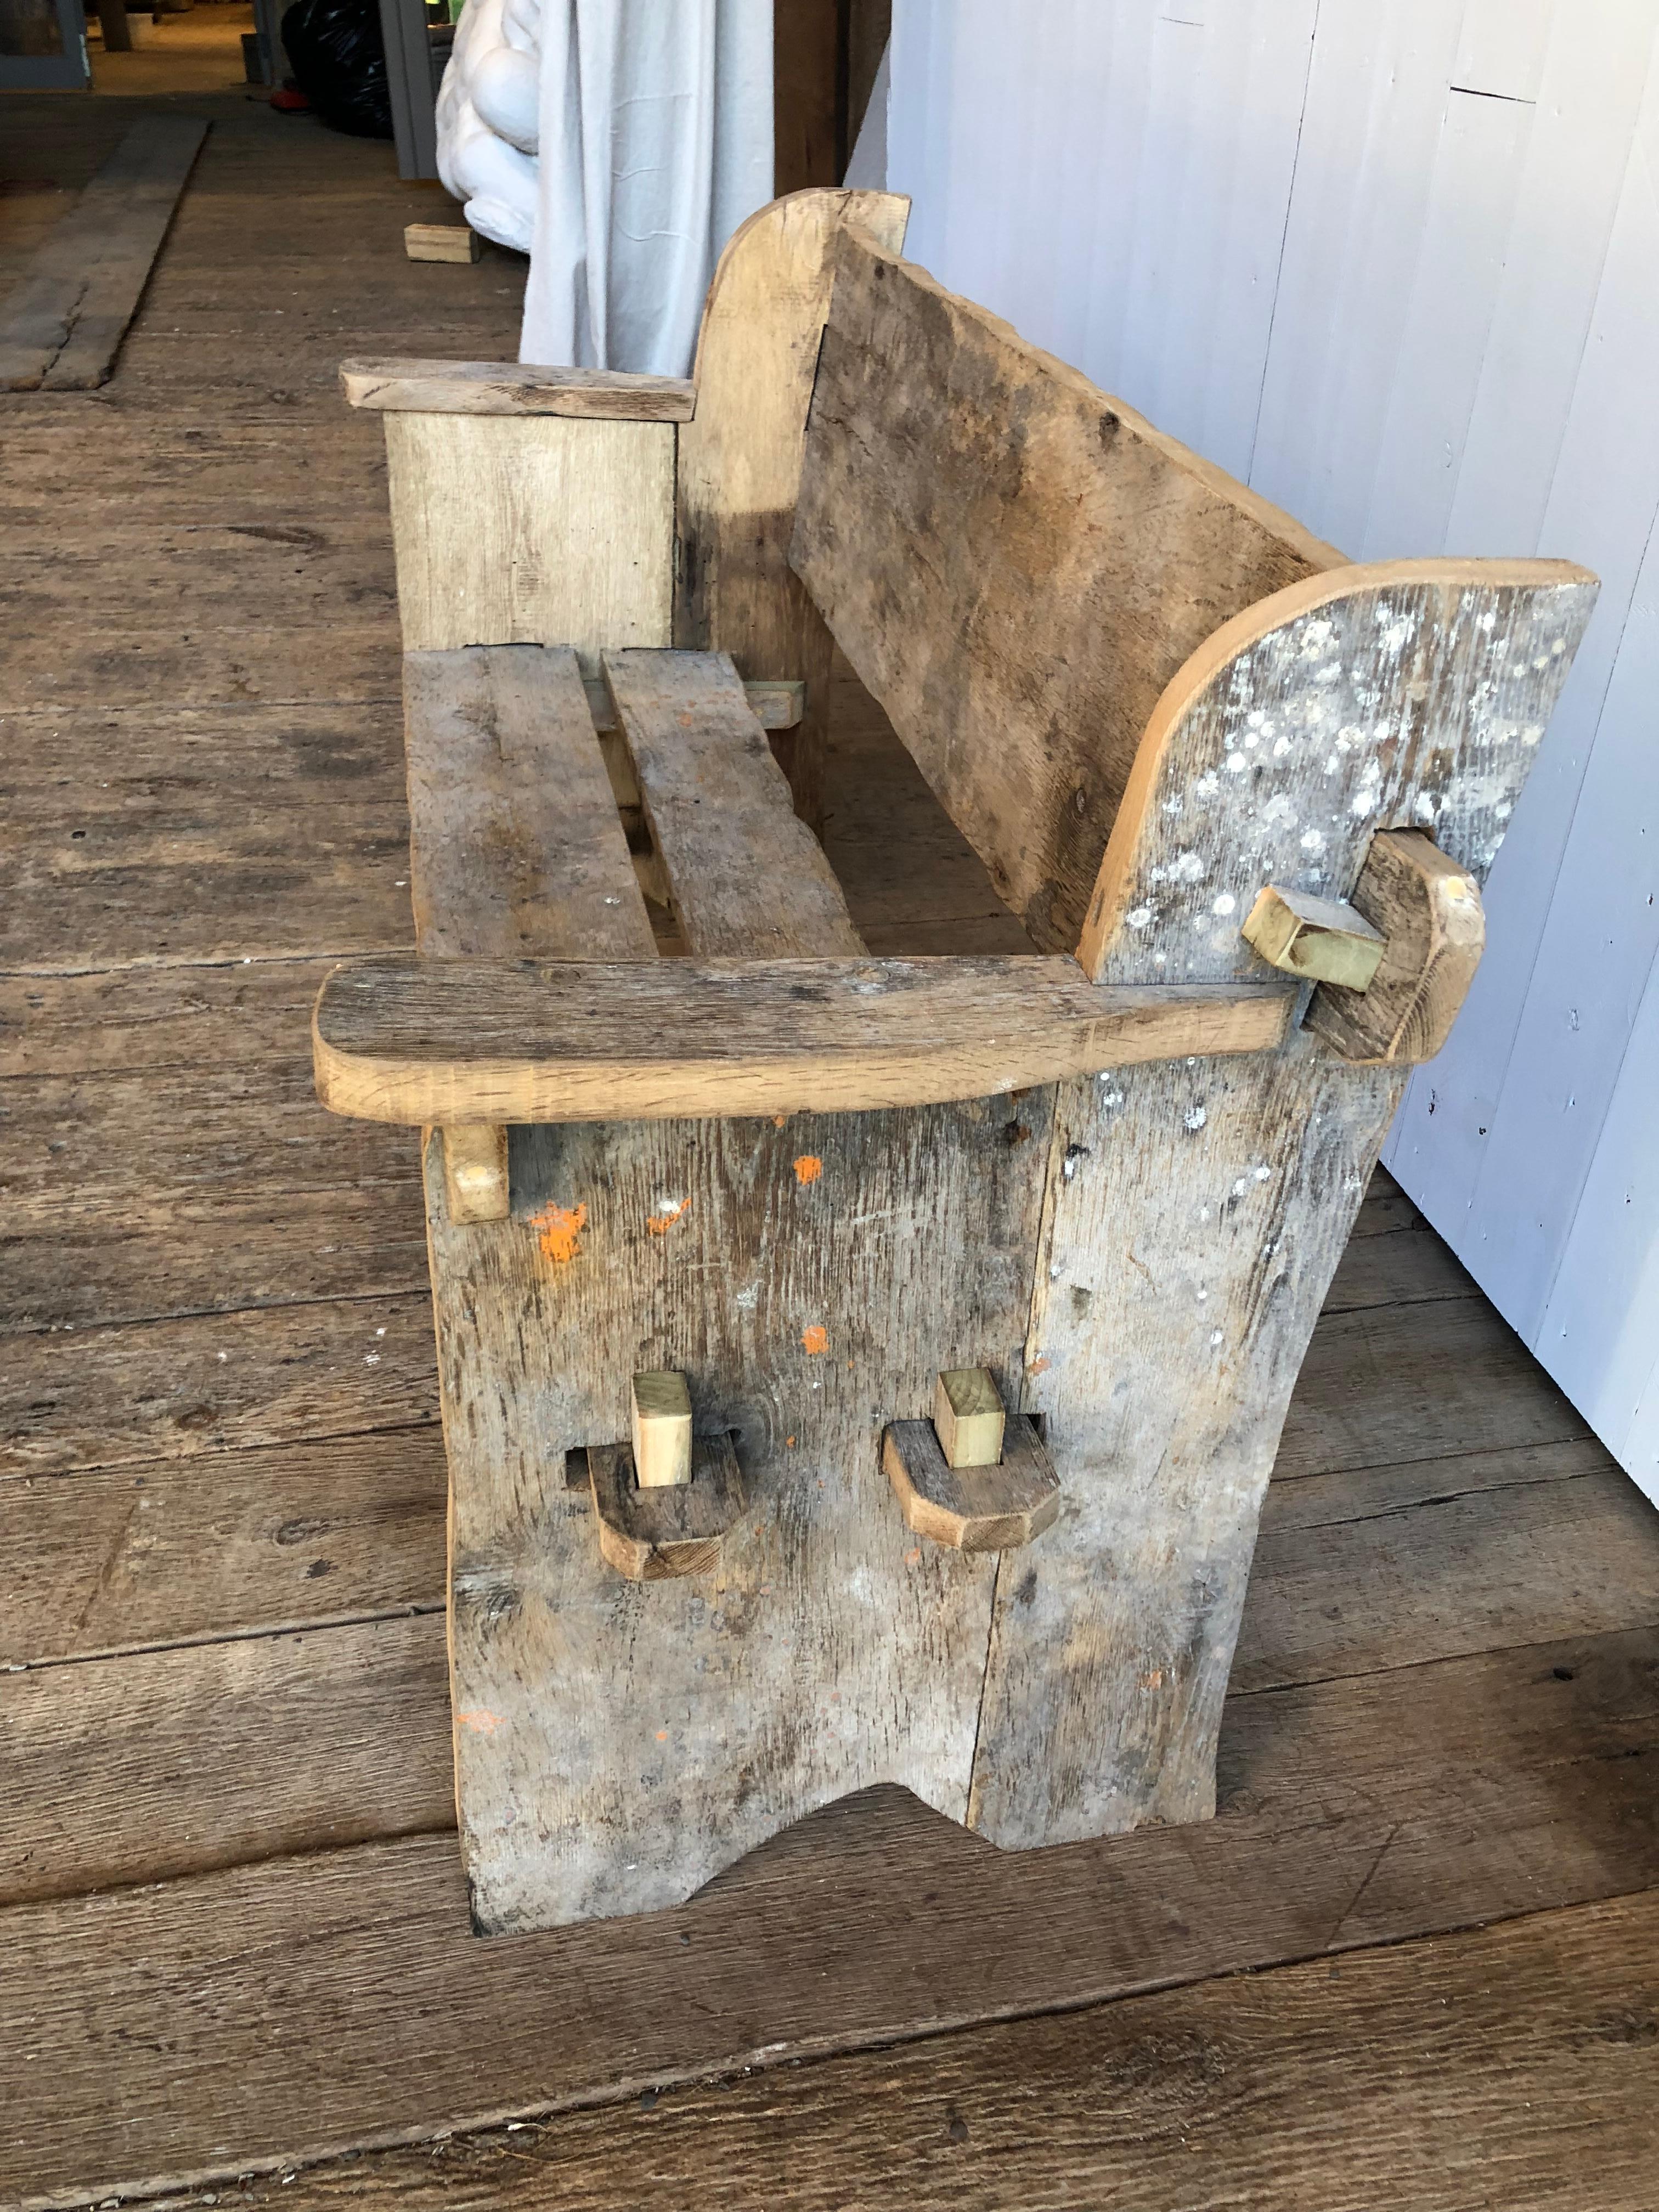 A rustic 2-seat bench in 250 year old chestnut and poplar with traces of old grey painted finish with other colors, based on a traditional “knock-down” Scottish design, the bench is handcrafted and is easily disassembled by removing 6 tapered wedges